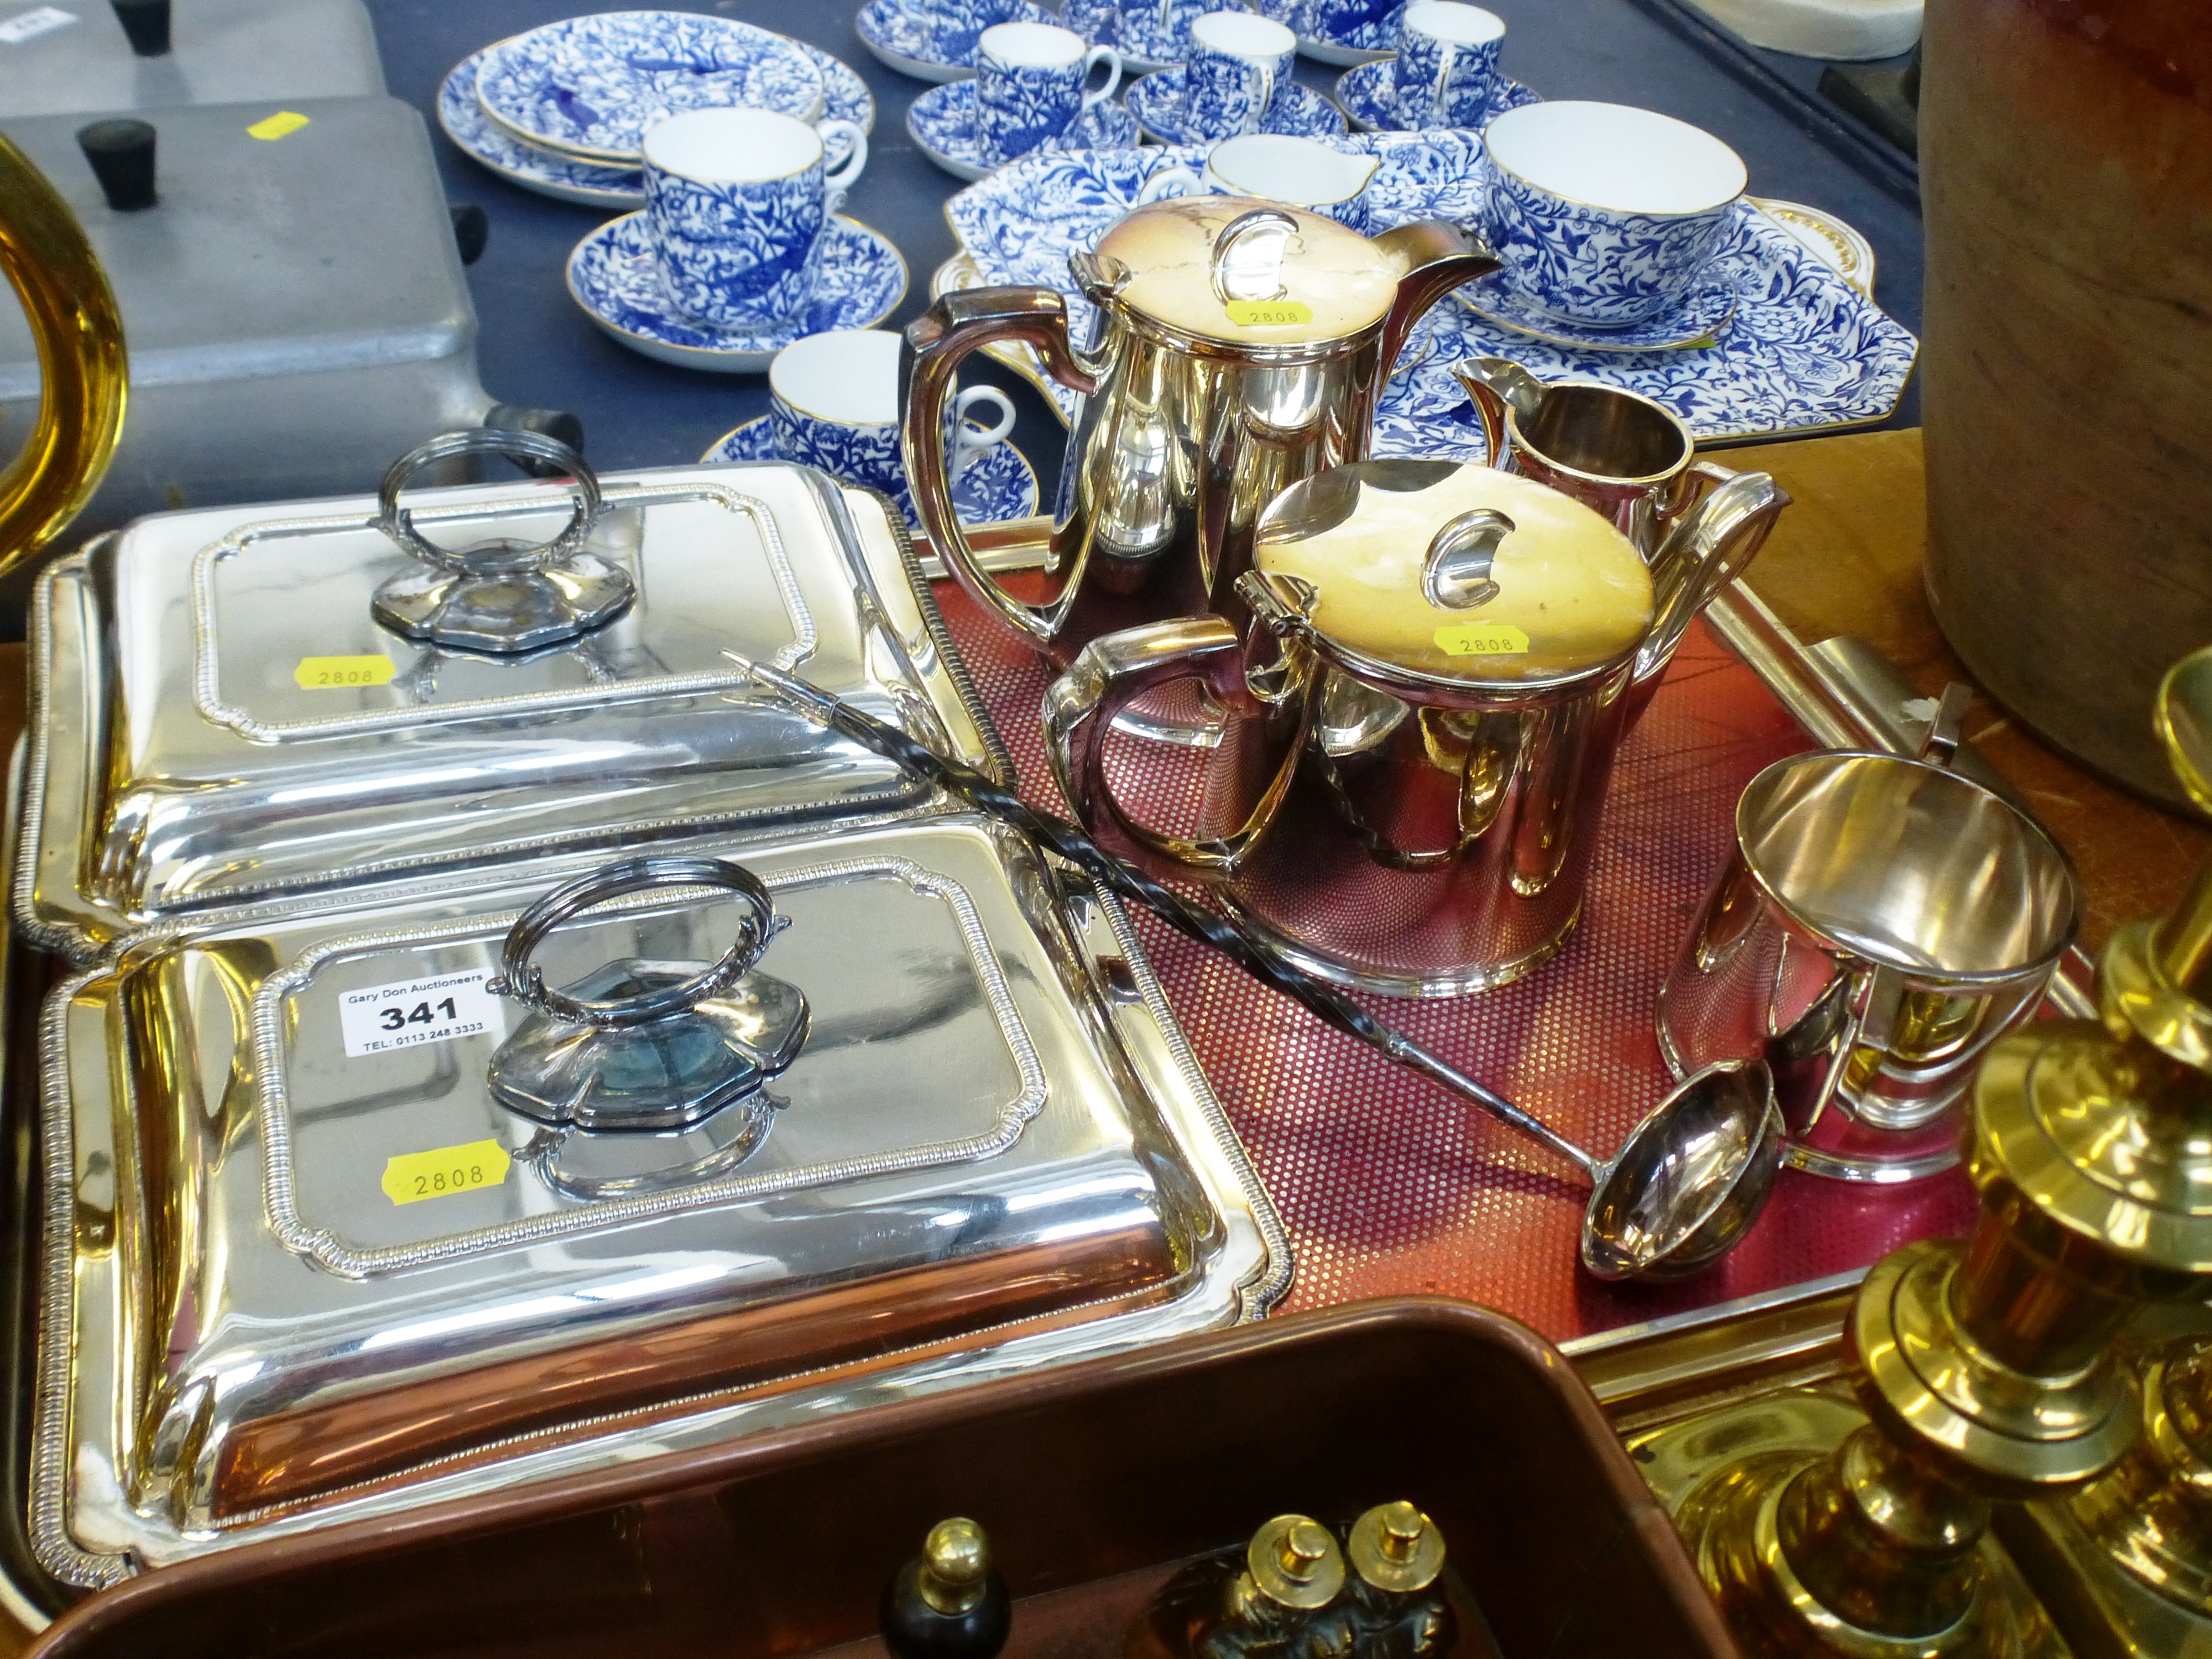 PLATED TEASET, 2 PLATED TUREENS AND A LADEL